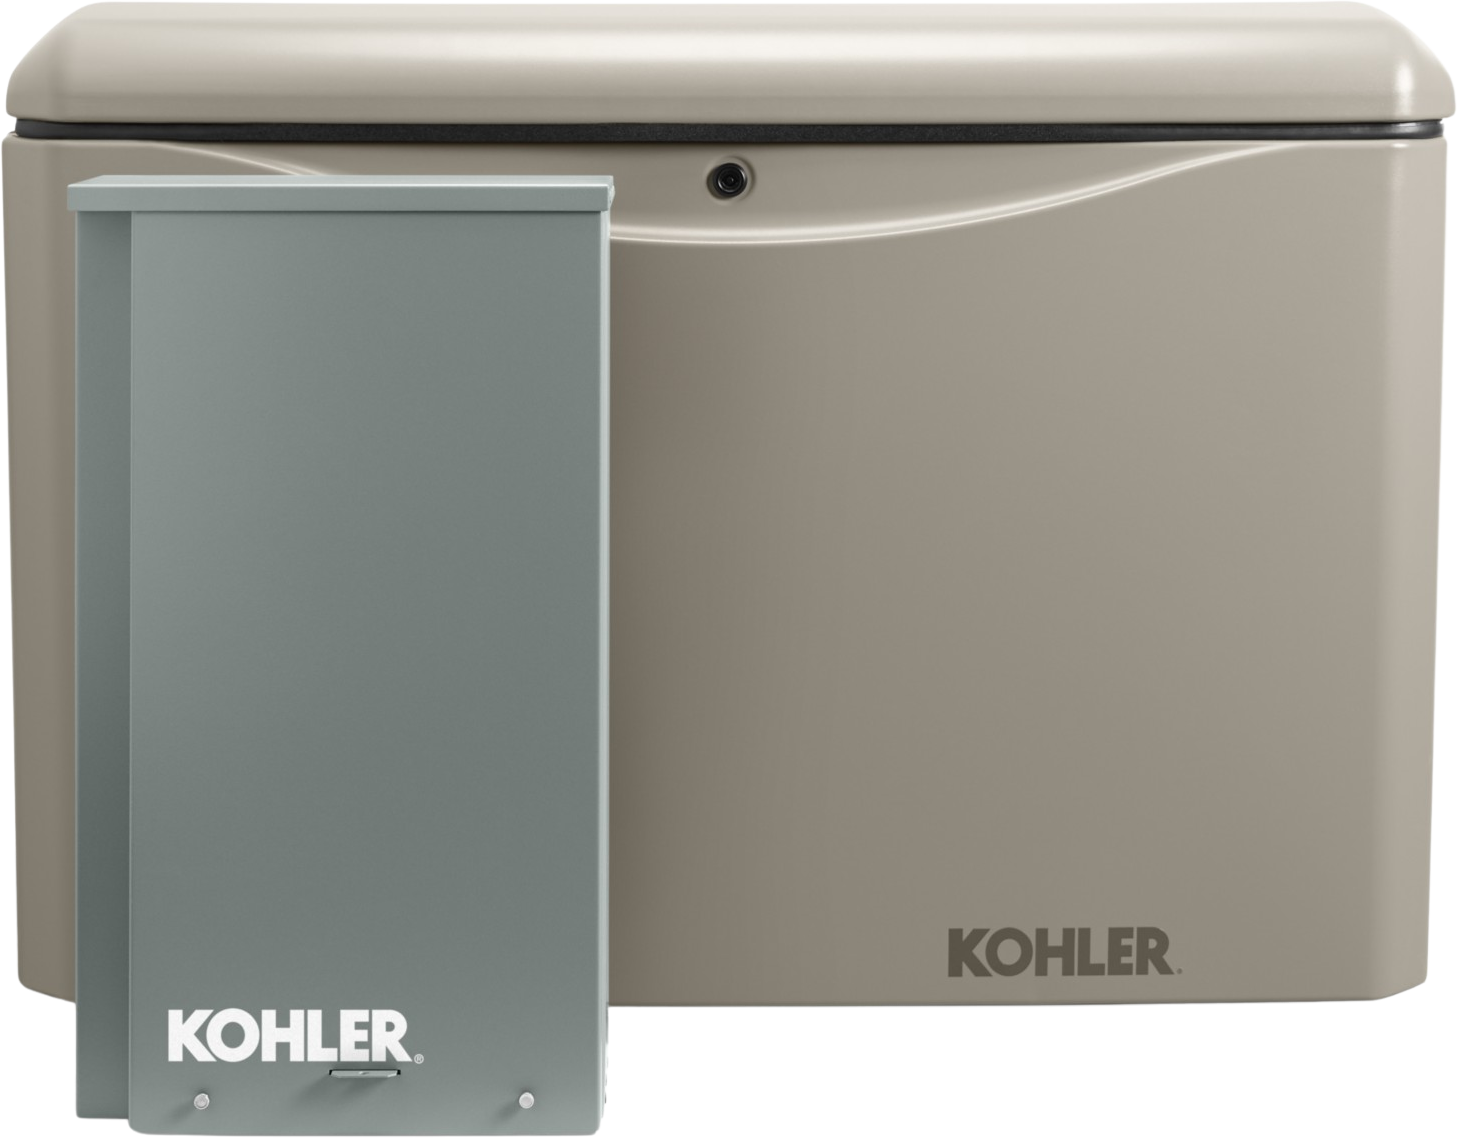 Kohler, Kohler 26RCAL-200SELS Standby Generator 26KW 120/240V Single Phase 200A Automatic Transfer Switch and OnCue Plus New